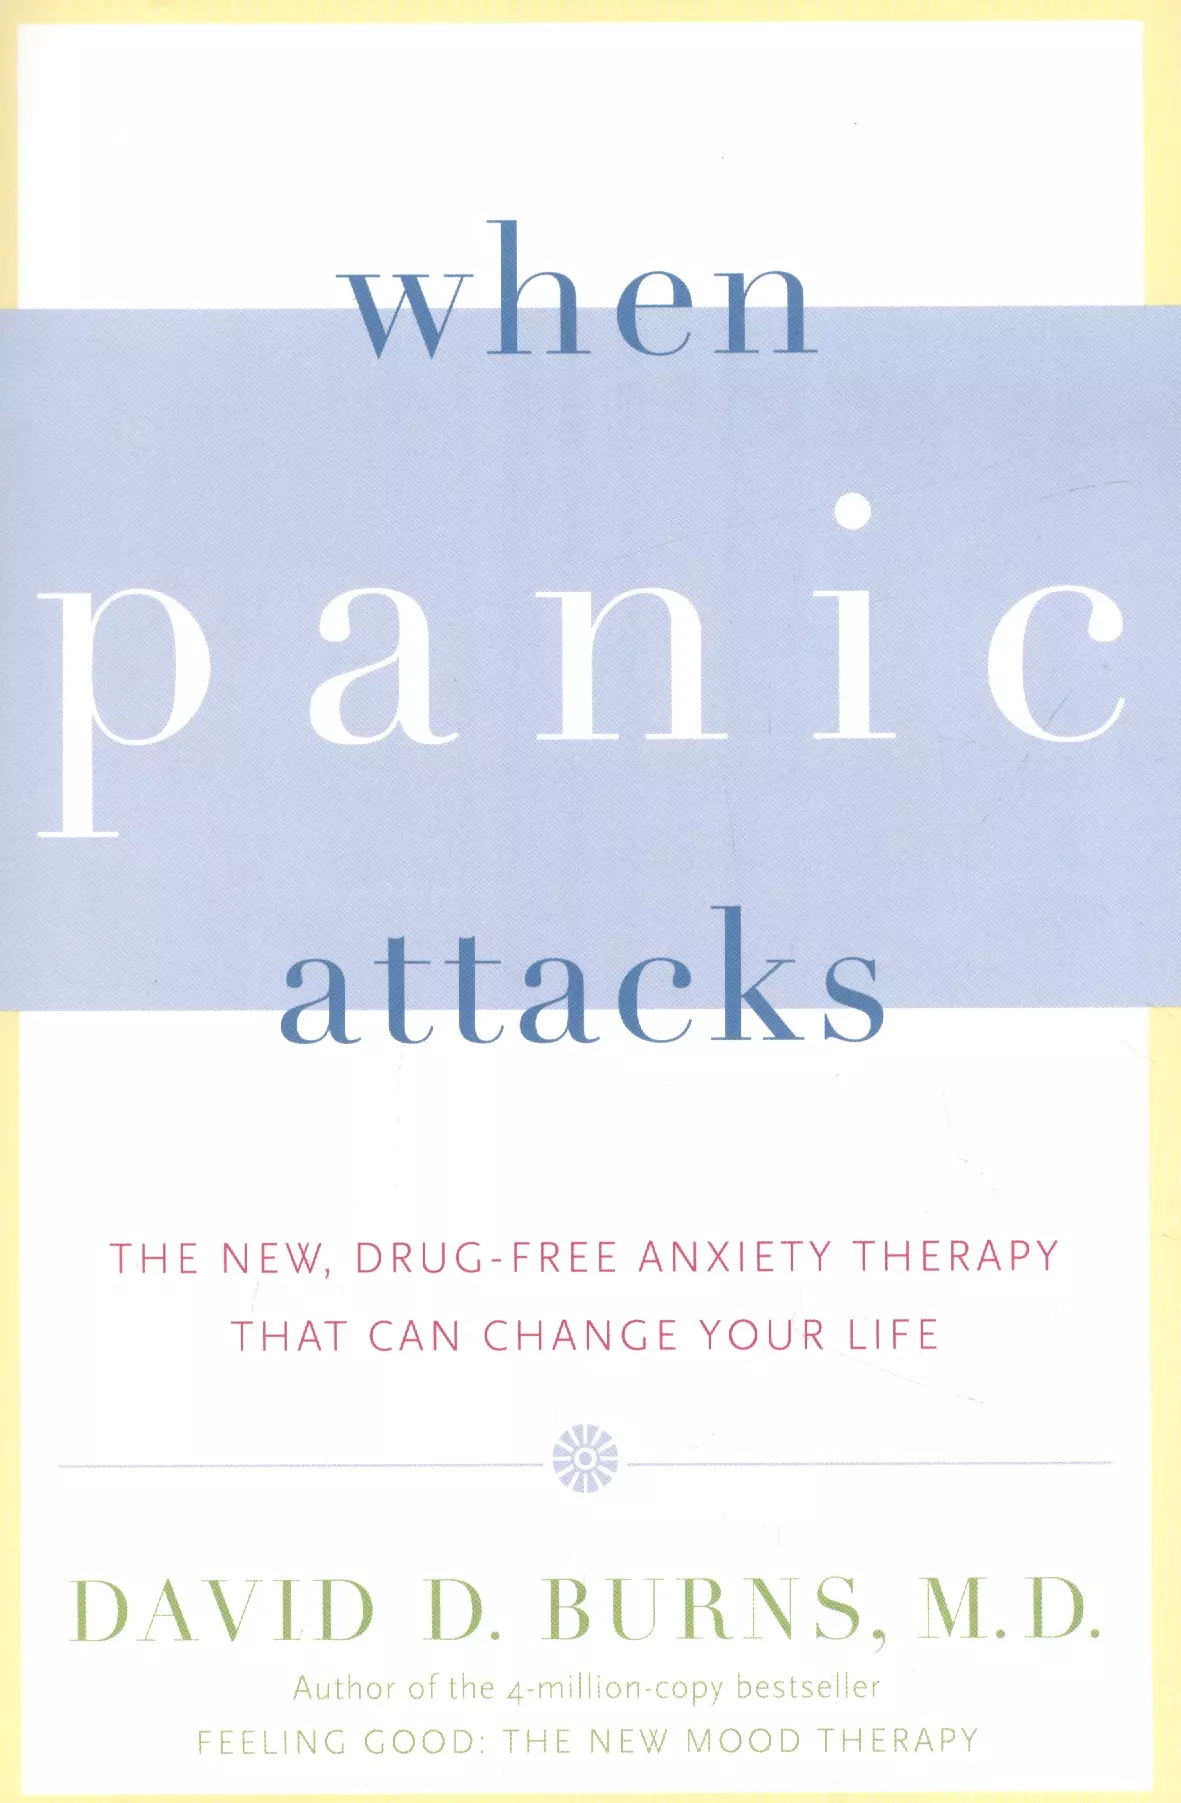 Burns David D. - When Panic Attacks: The New, Drug-Free Anxiety Therapy That Can Change Your Life